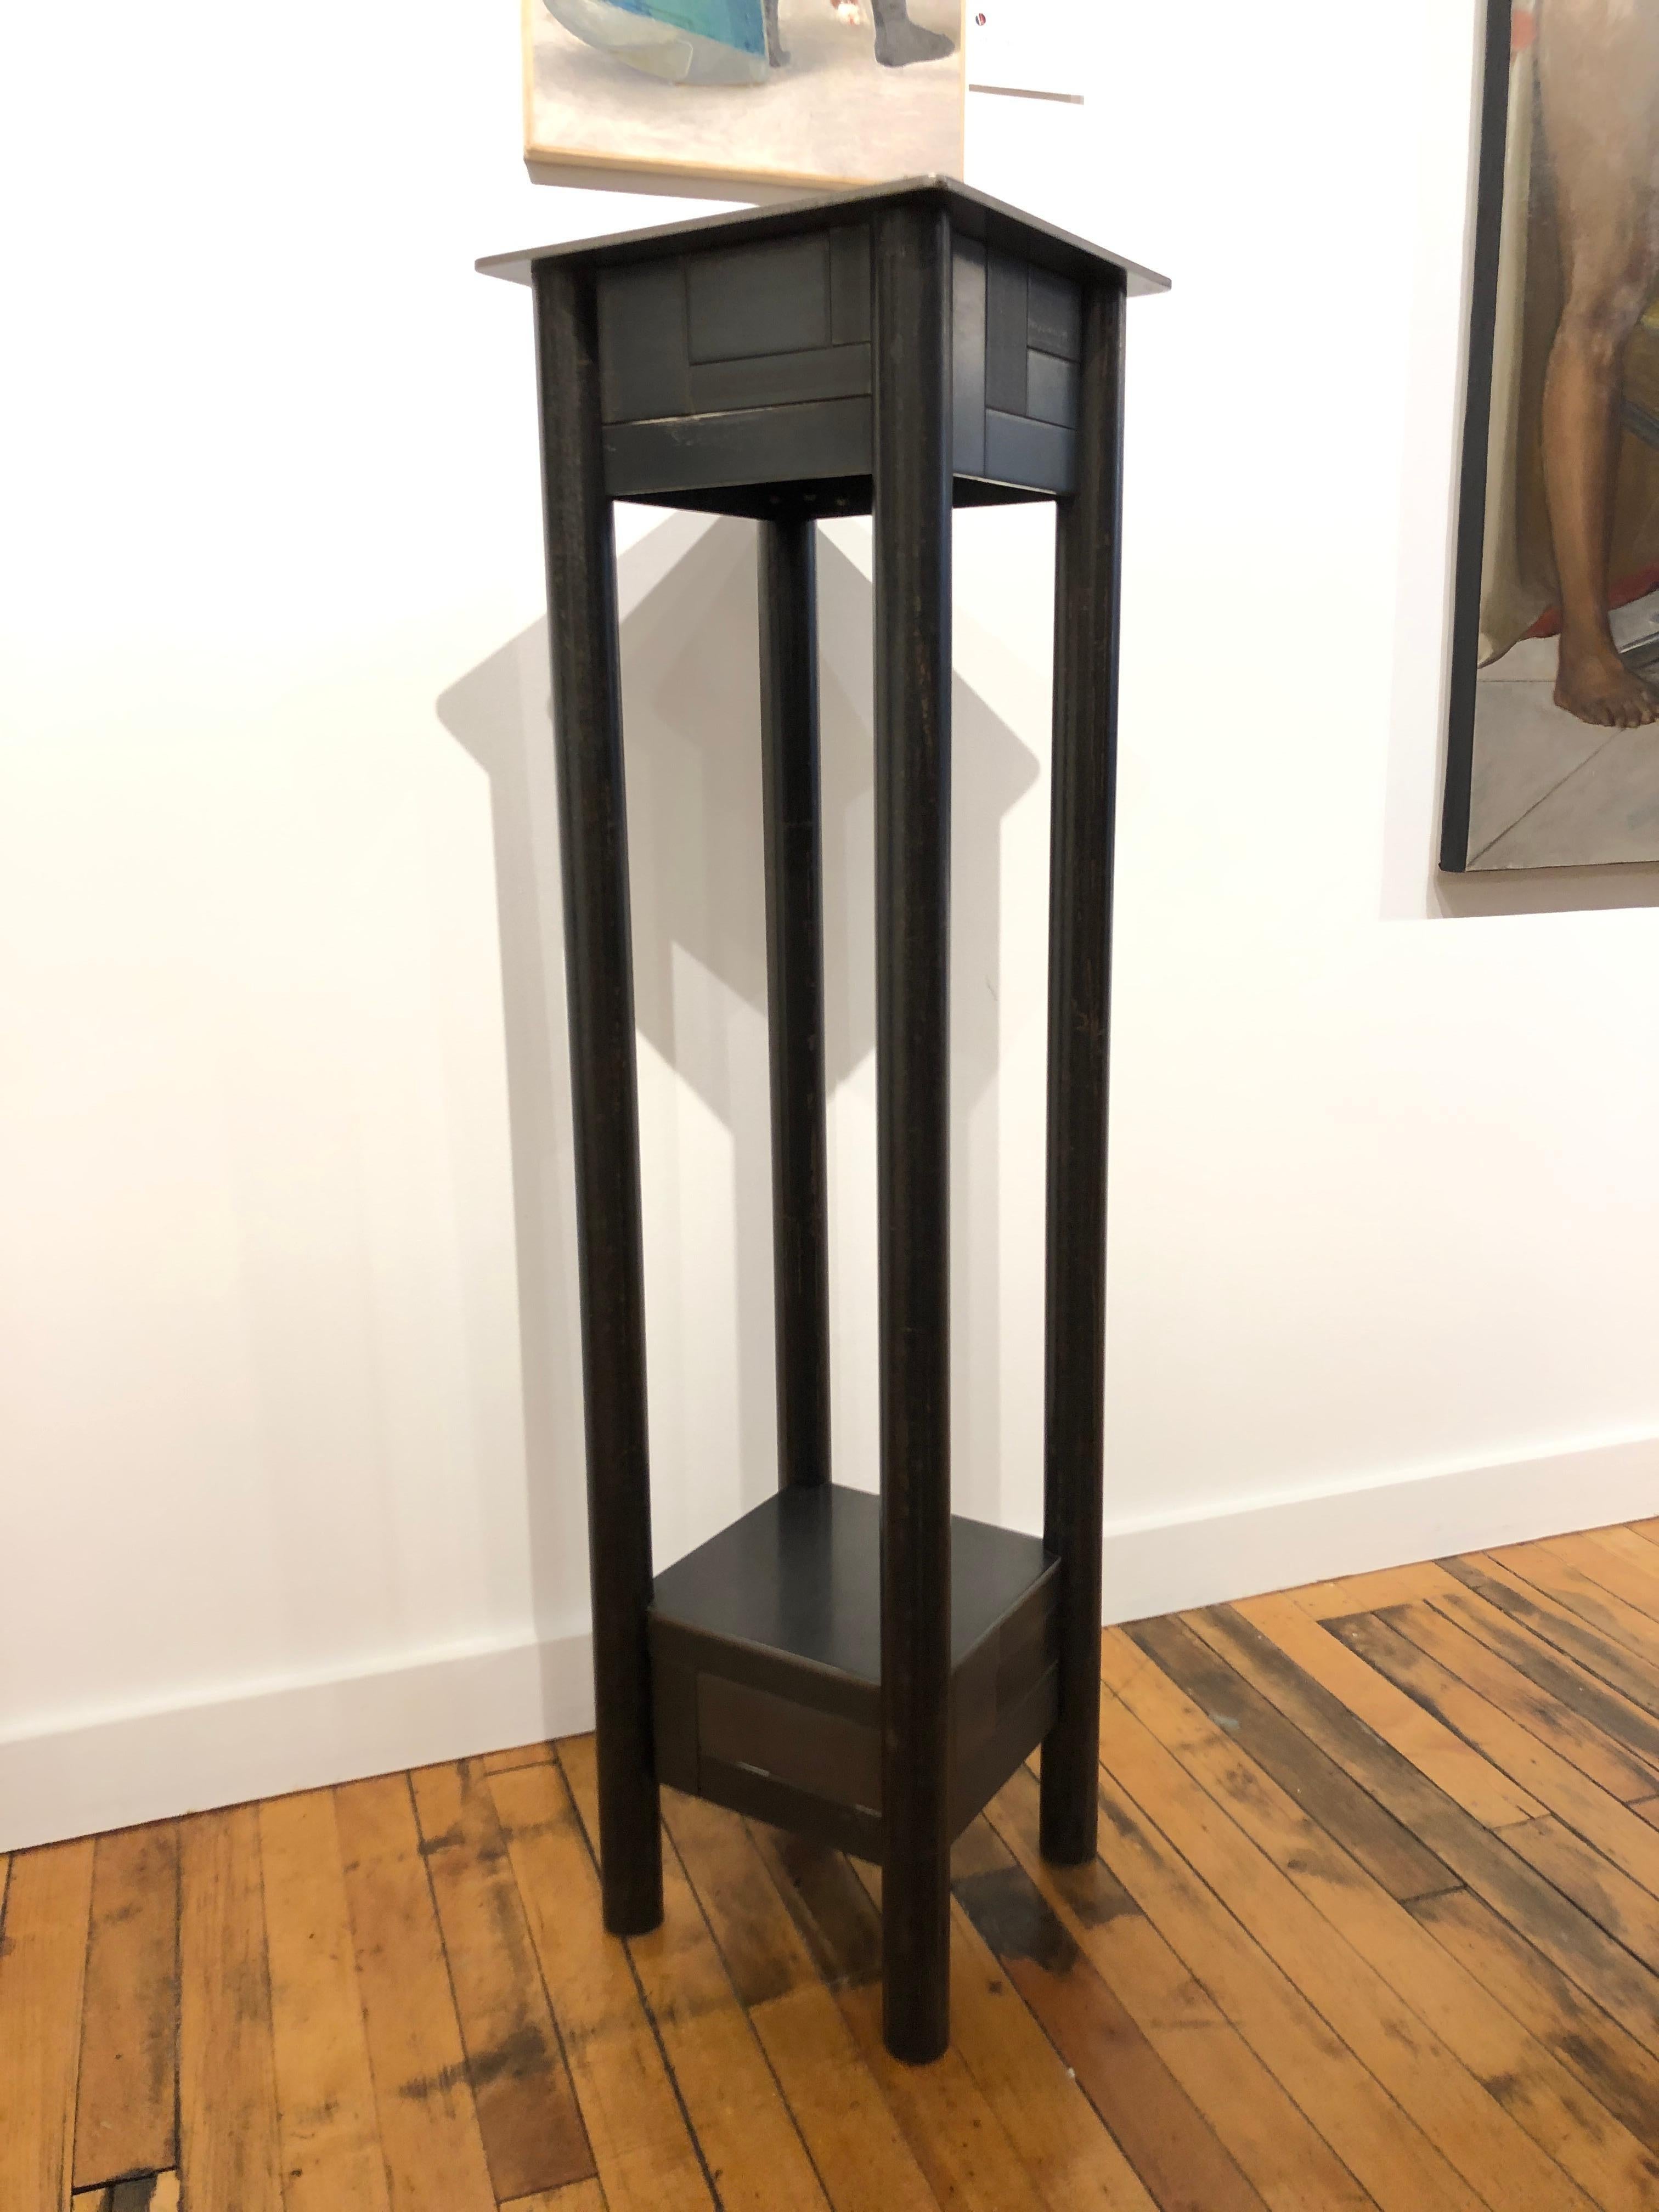 This is a welded steel industrial modern pedestal with a low shelf and a monochromatic skirt of steel panels arranged in a quilt pattern inspired by the quilts of Gee's Bend Alabama. Each piece of furniture is unique and made by Jim Rose. The skirt